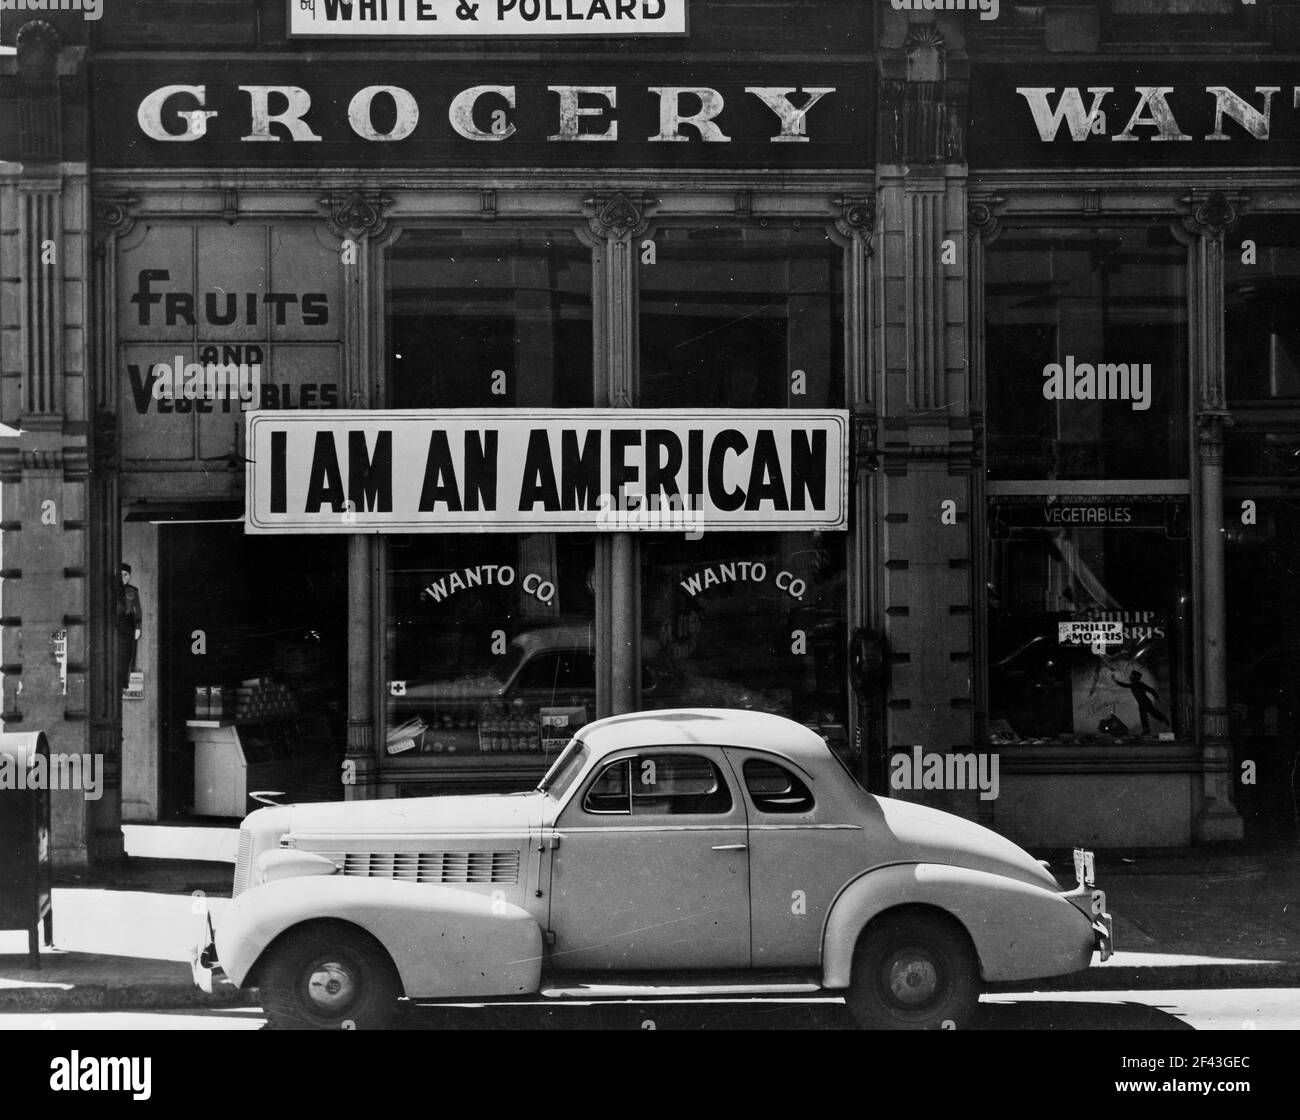 Wanto Co. store located at 401 - 403 Eighth and Franklin Streets in Oakland, California. The business was owned by the Matsuda family. Tatsuro Matsuda, a University of California graduate, commissioned and installed the "I am an American" sign.Photograph by Dorothea Lange. Stock Photo